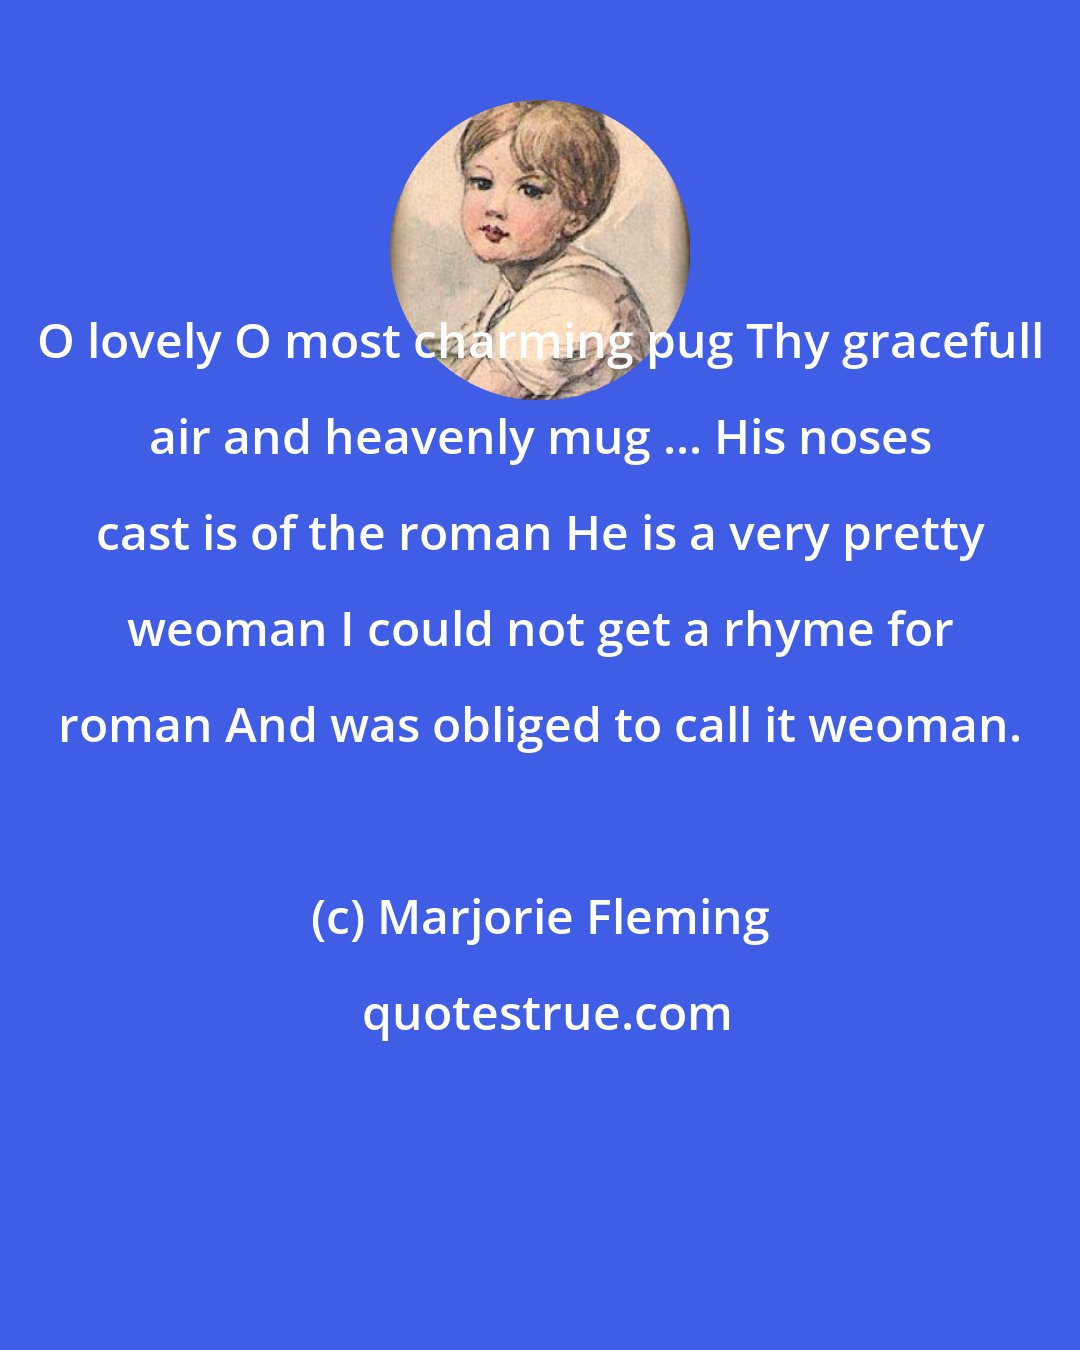 Marjorie Fleming: O lovely O most charming pug Thy gracefull air and heavenly mug ... His noses cast is of the roman He is a very pretty weoman I could not get a rhyme for roman And was obliged to call it weoman.